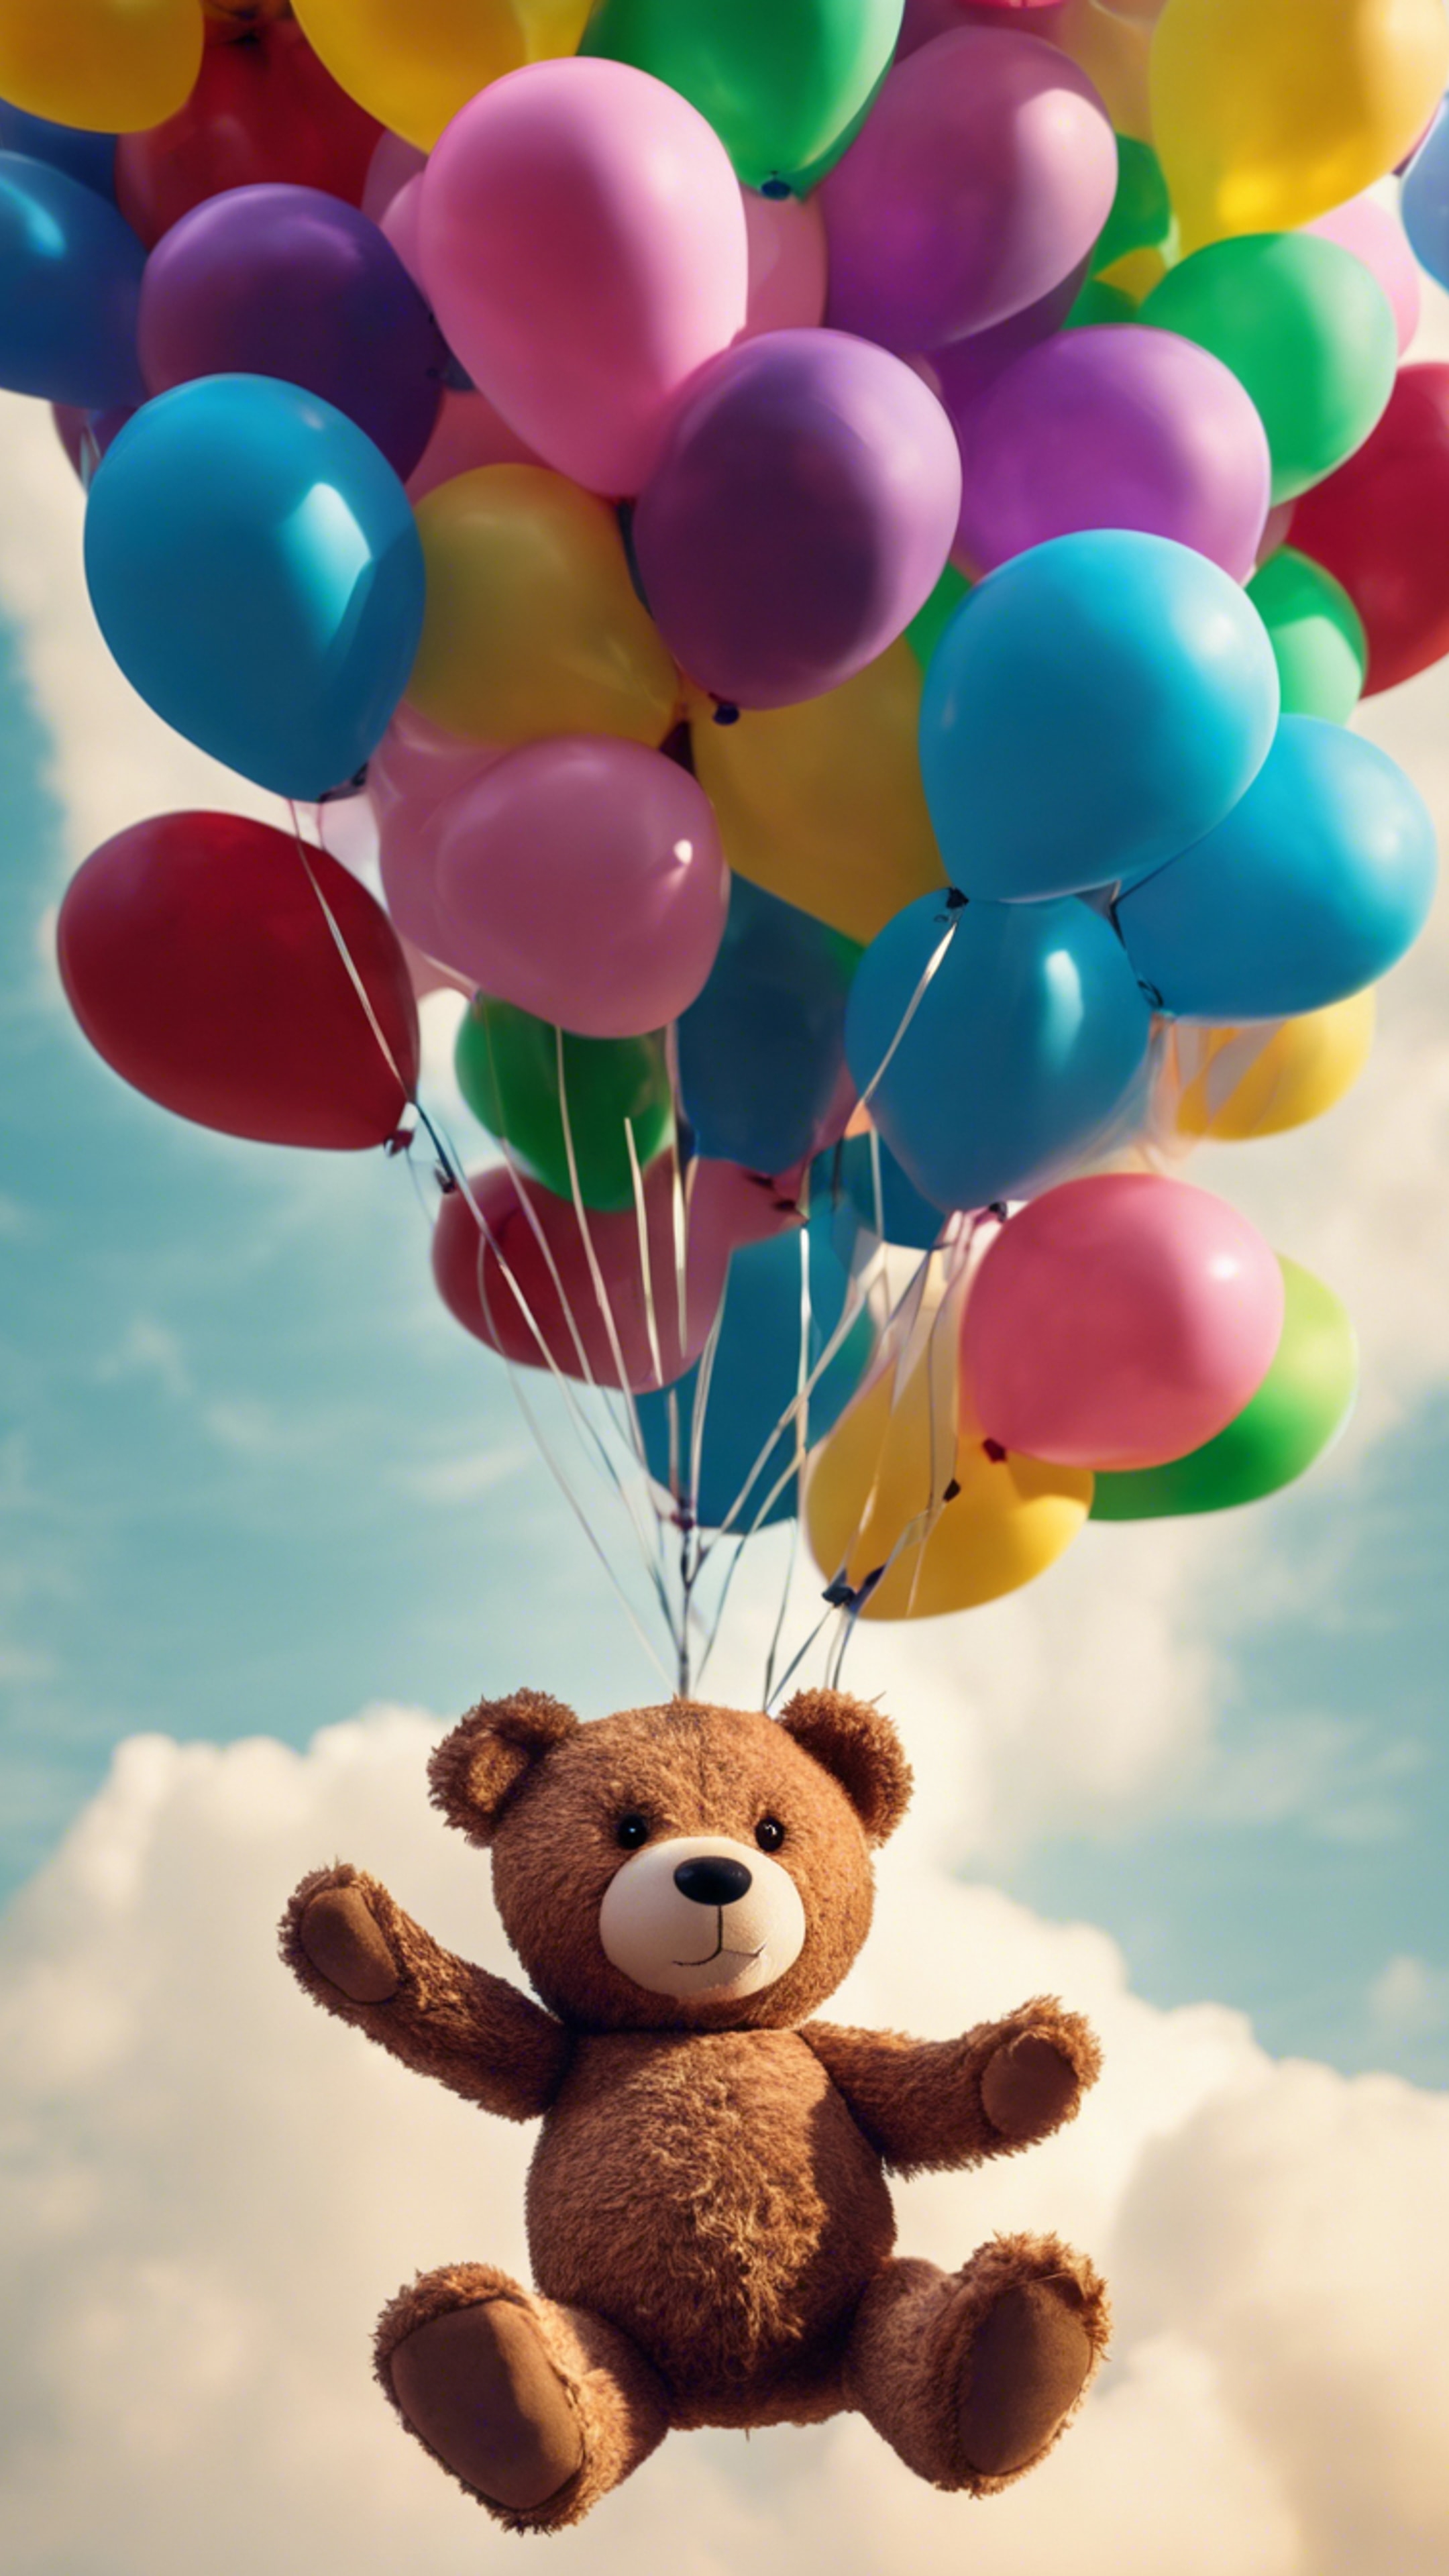 A teddy bear floating in the sky suspended to a set of colorful helium balloons. Hintergrund[3cd150b054934ab09e64]